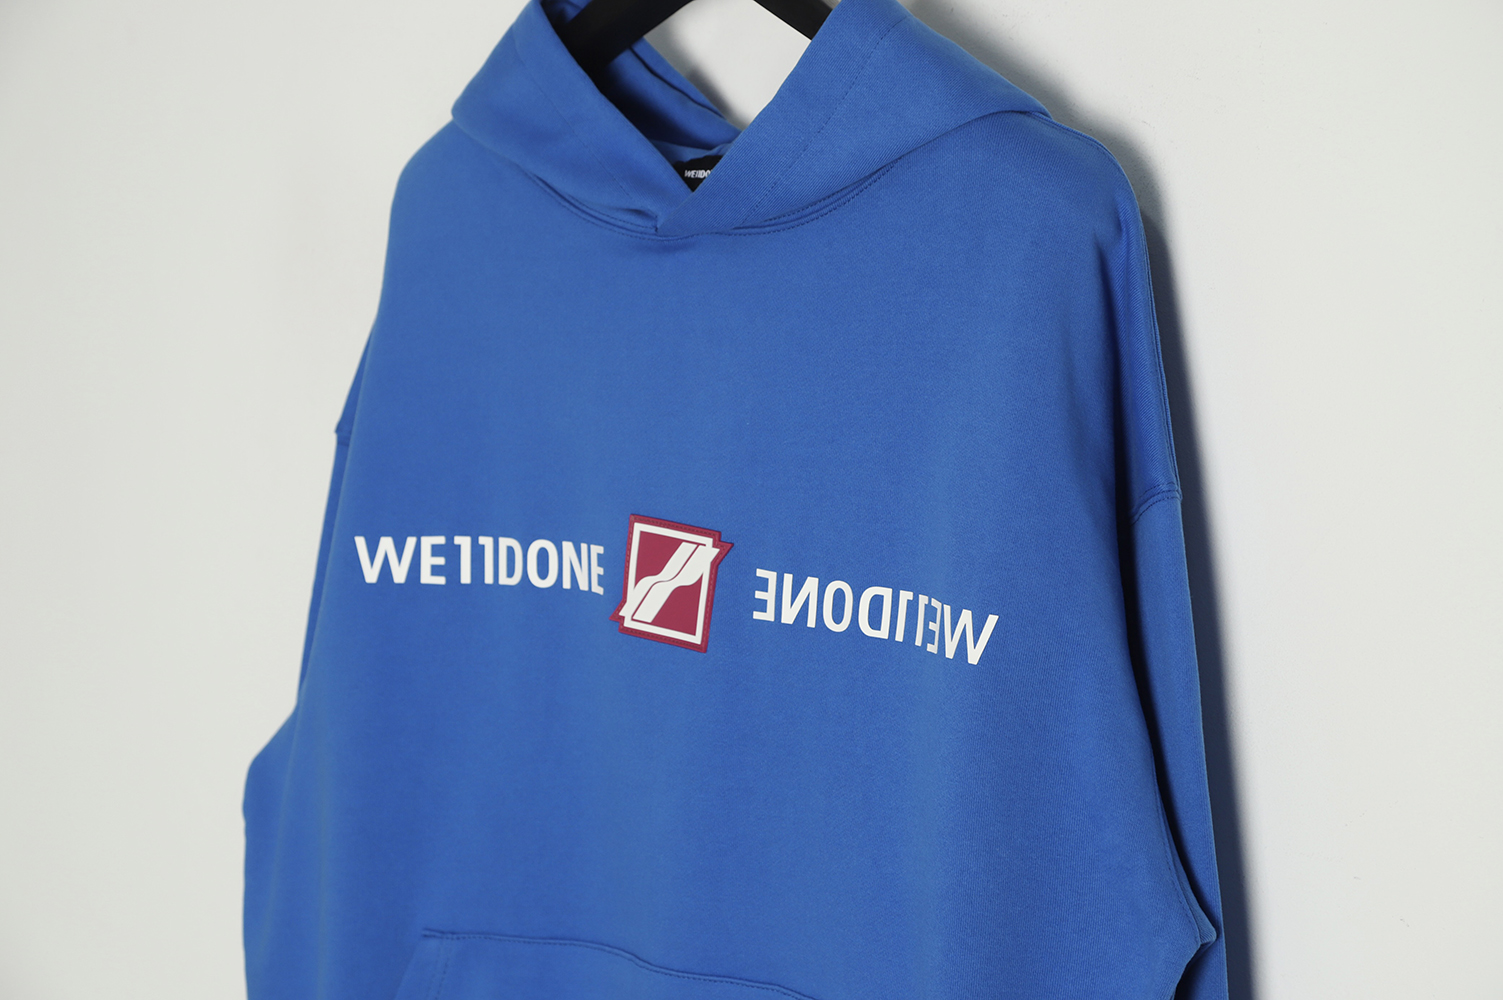 WE11 DONE 22FW Small Block Letter Hoodie TSK1